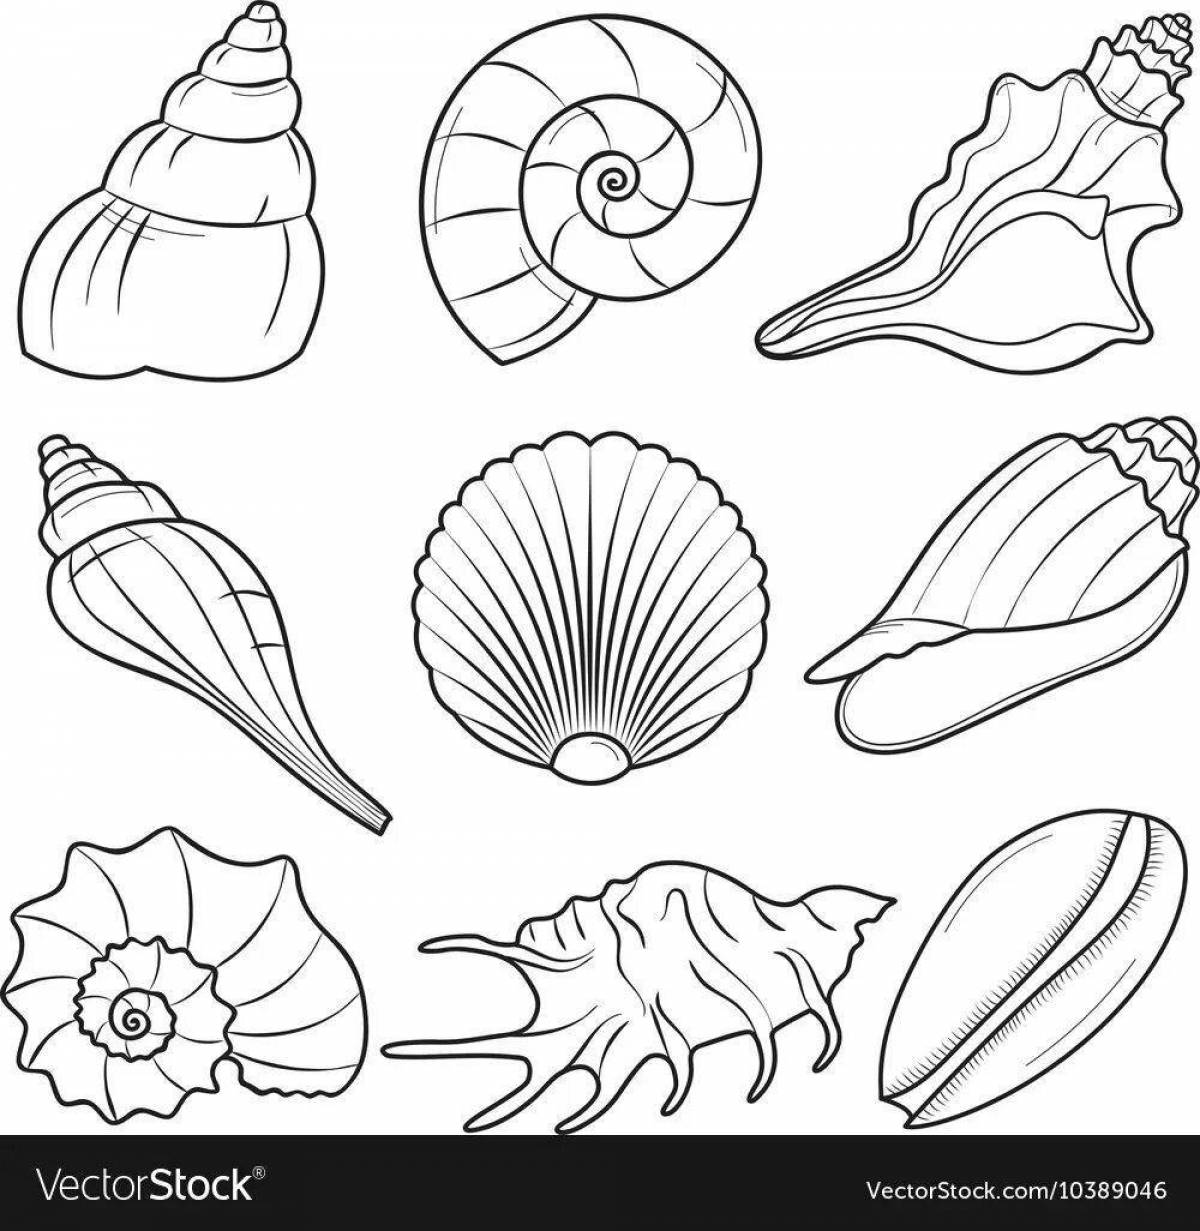 Glowing seashells coloring book for kids